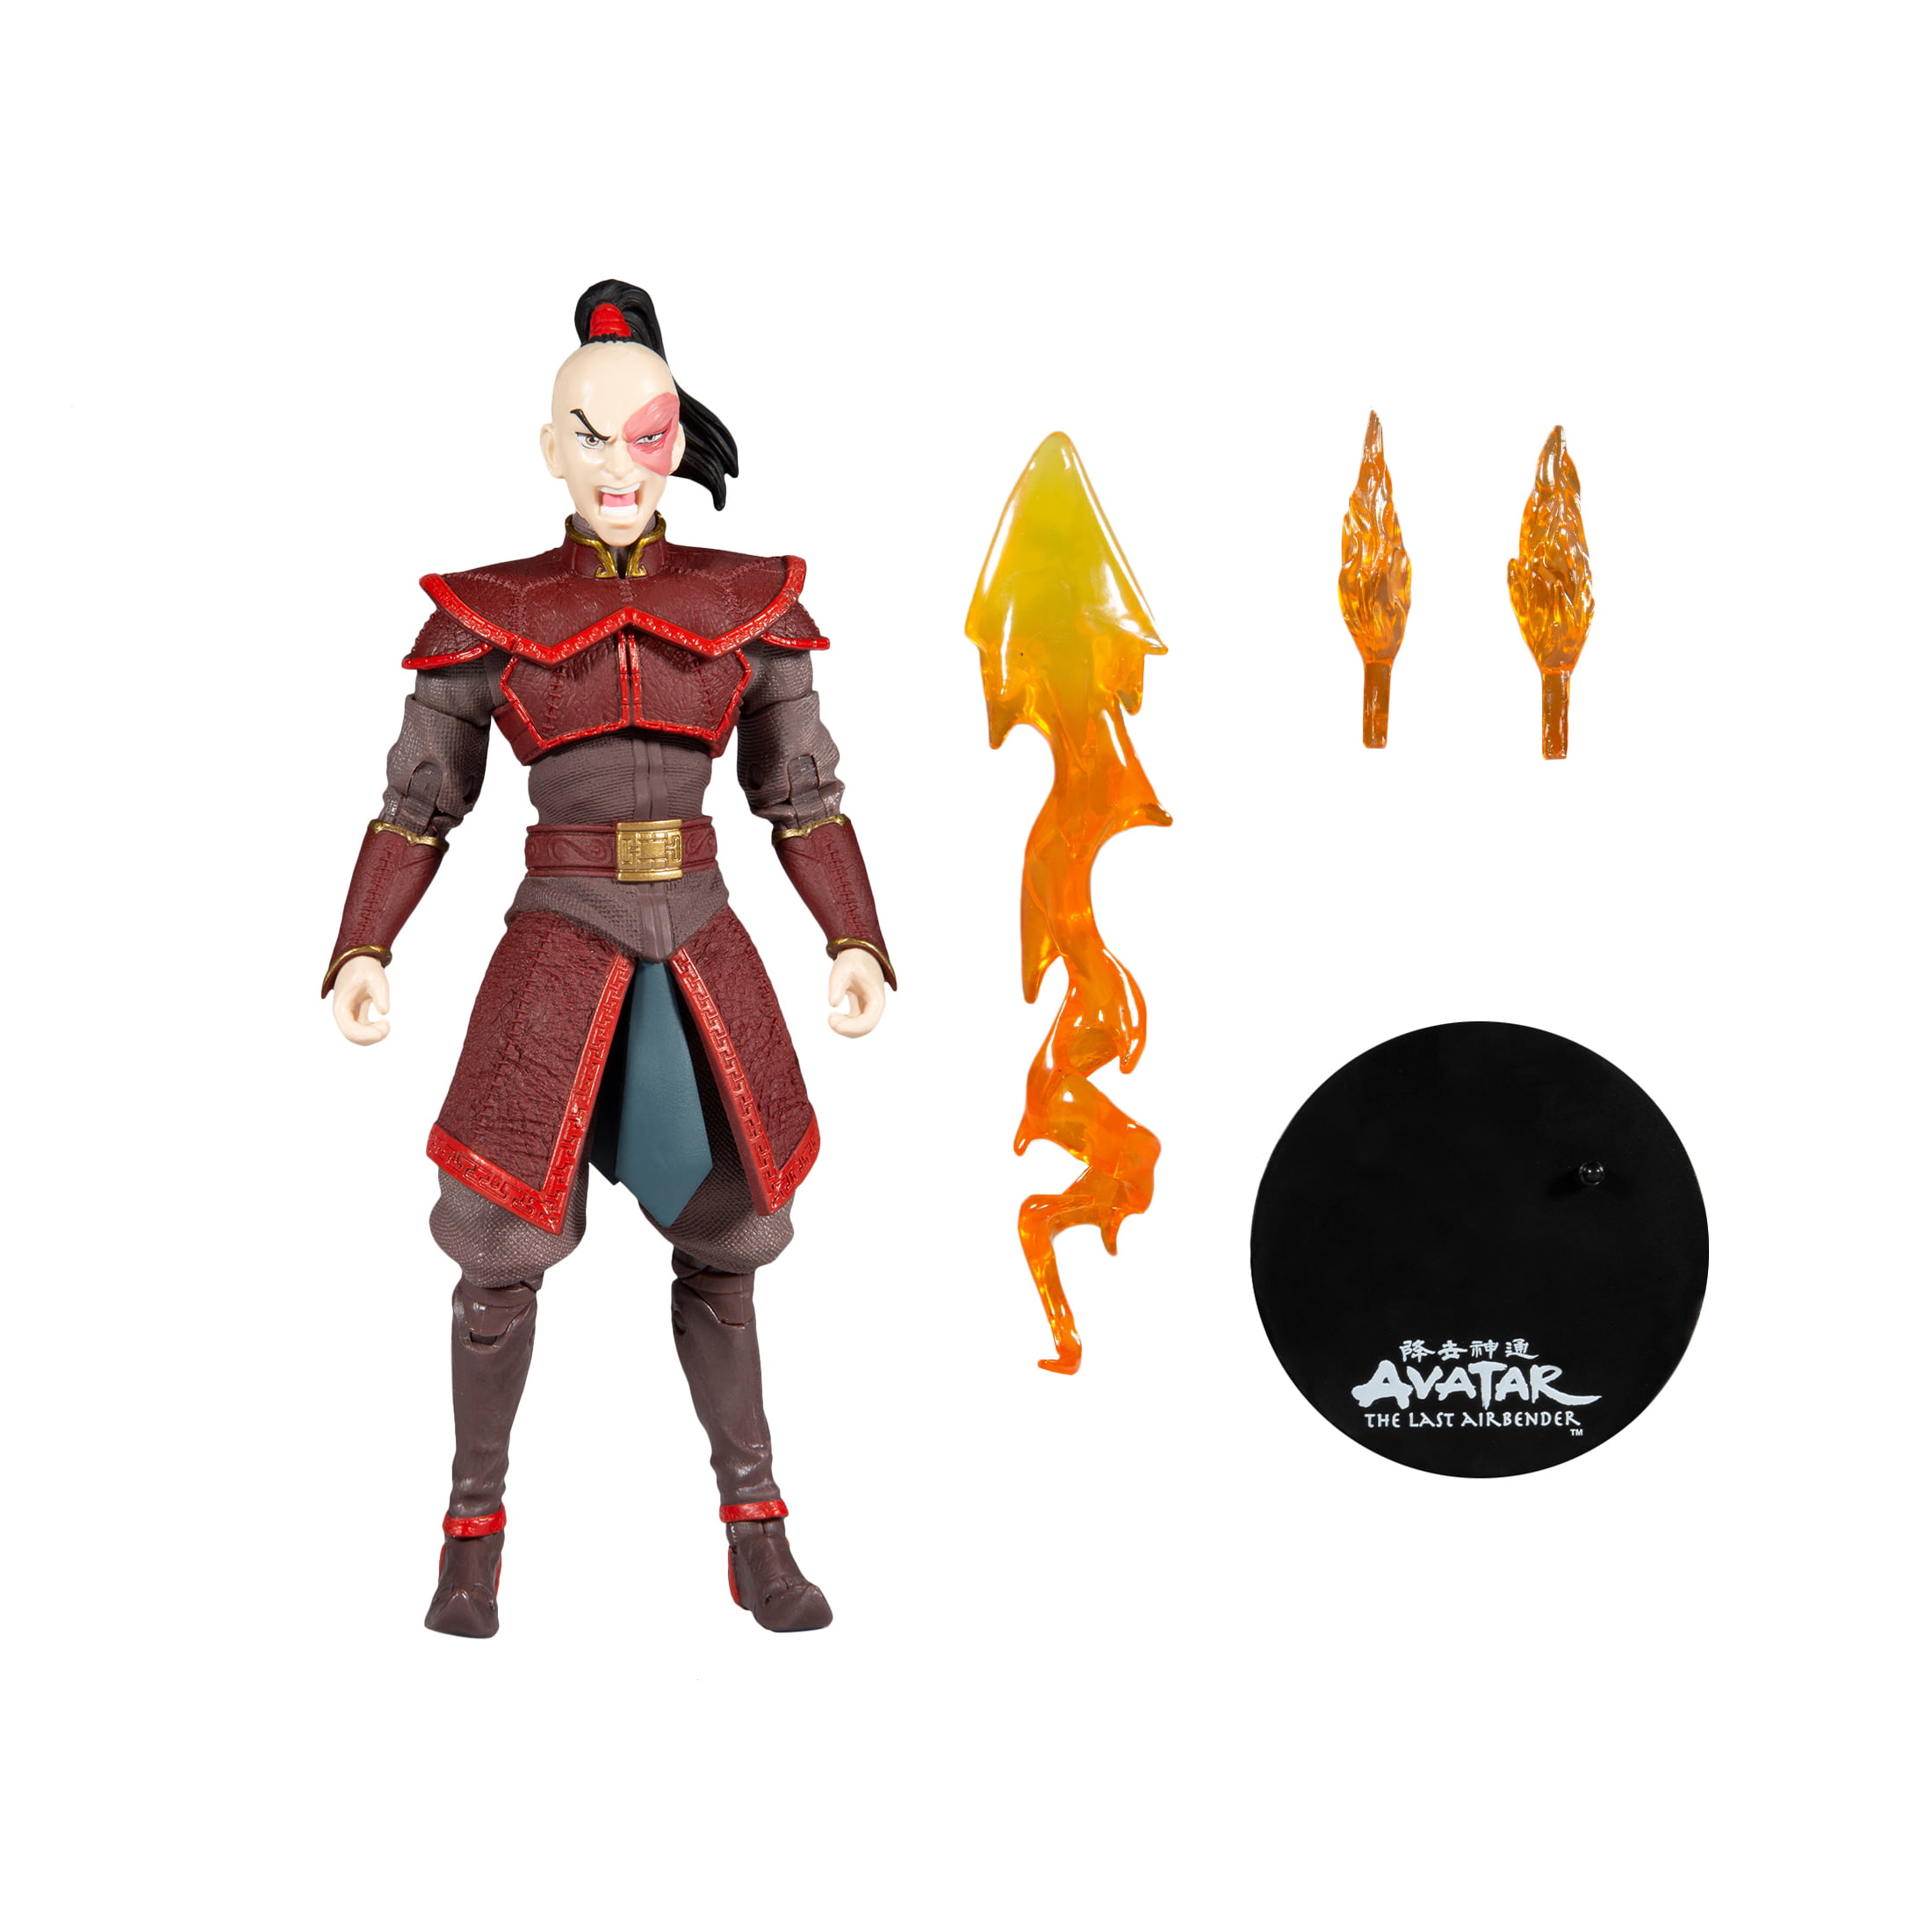 6"  AVATAR The Last Airbender FIRE NATION SOLDIER Action Figure Boy Toy Gift 